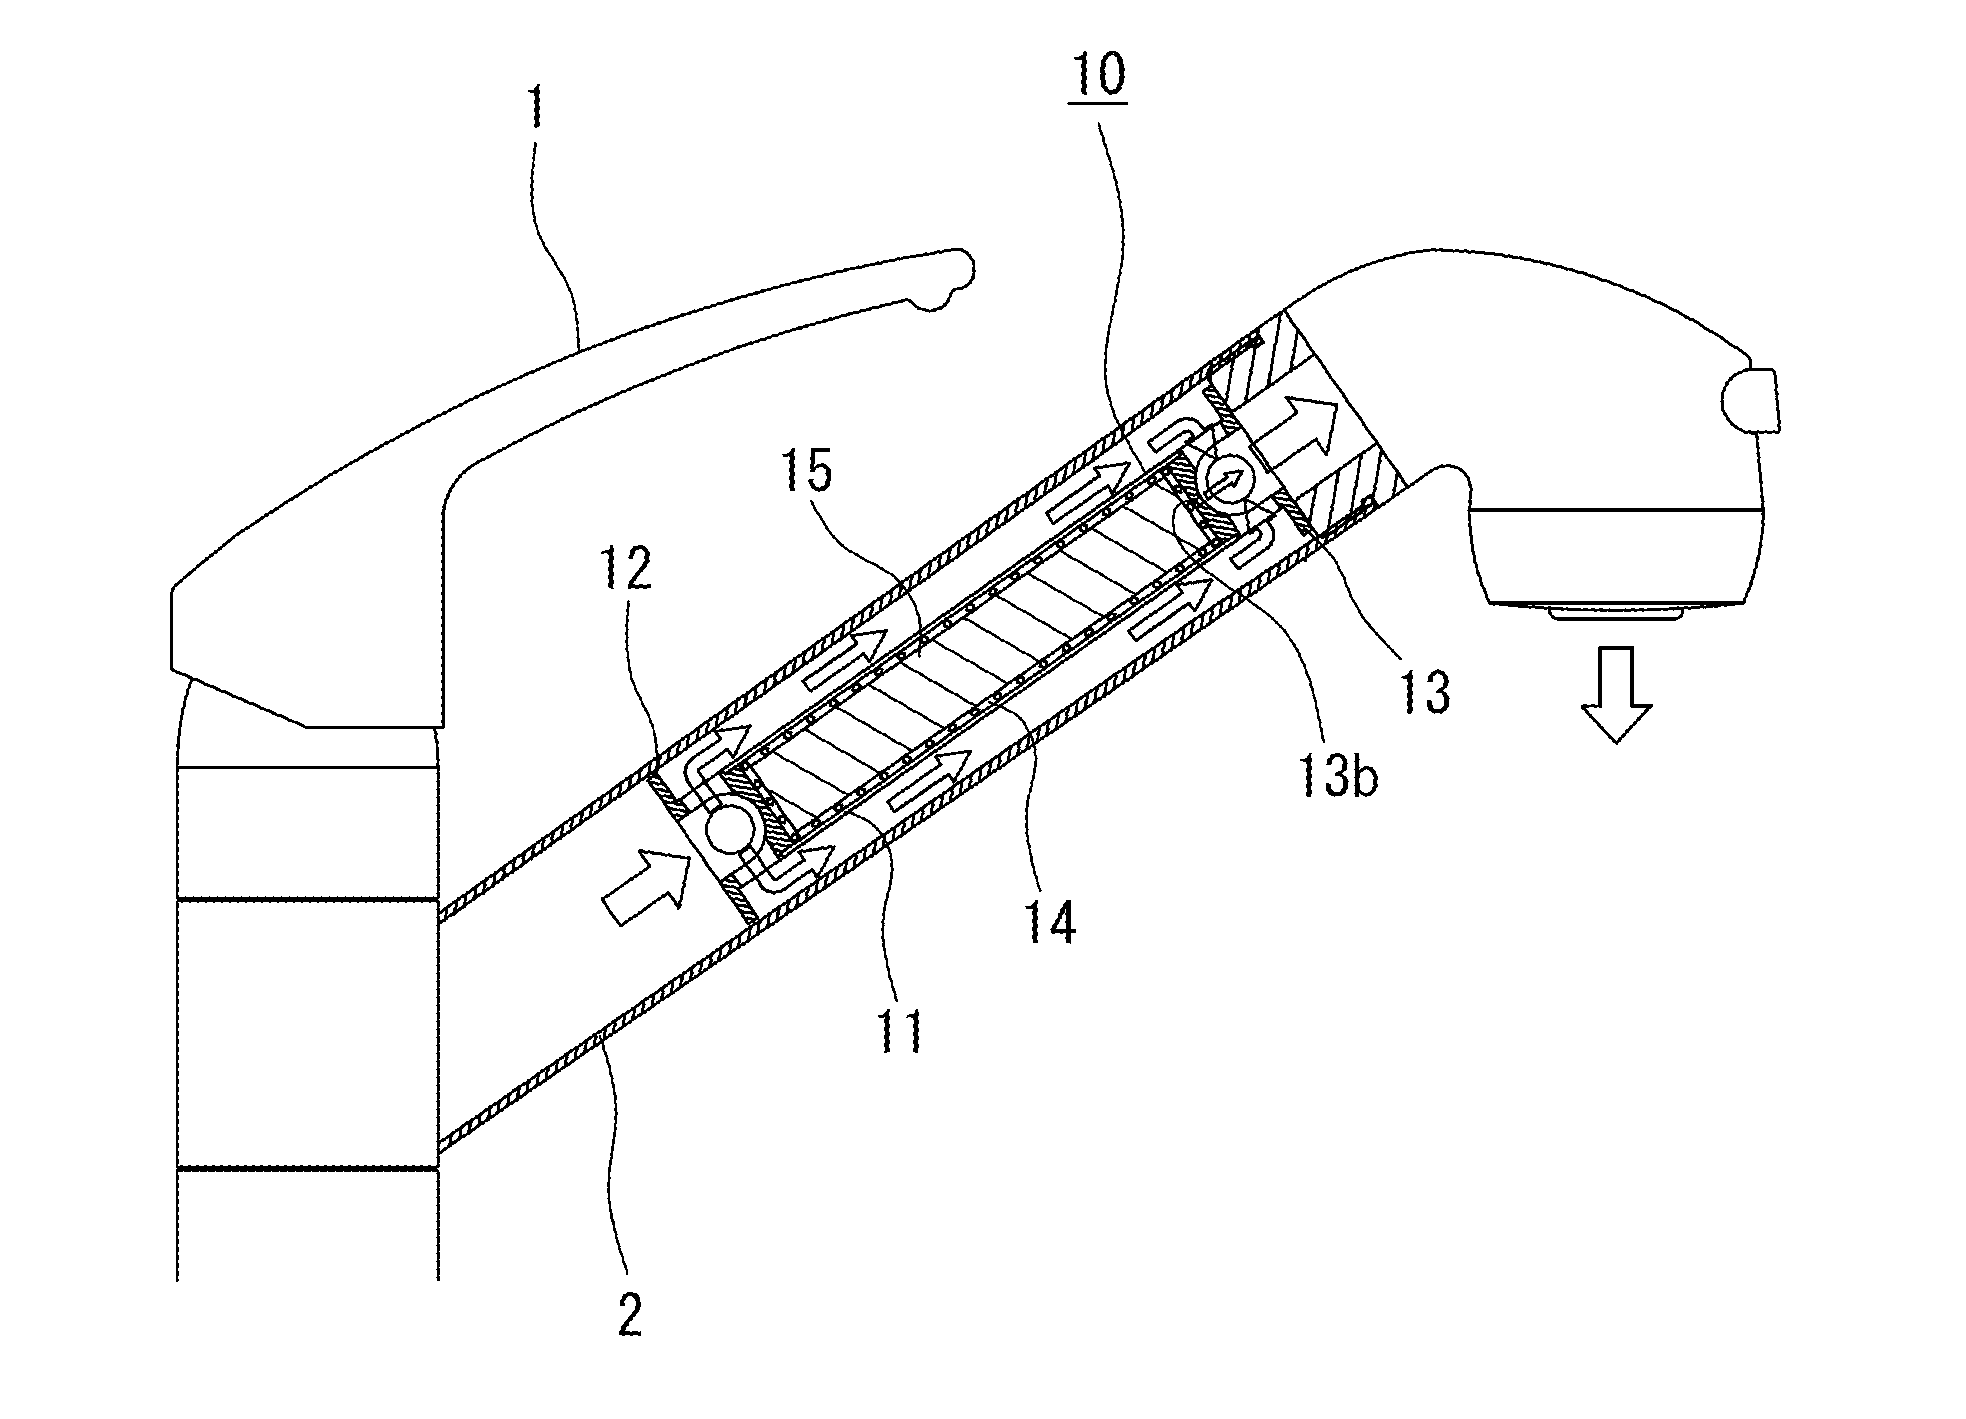 Water battery device